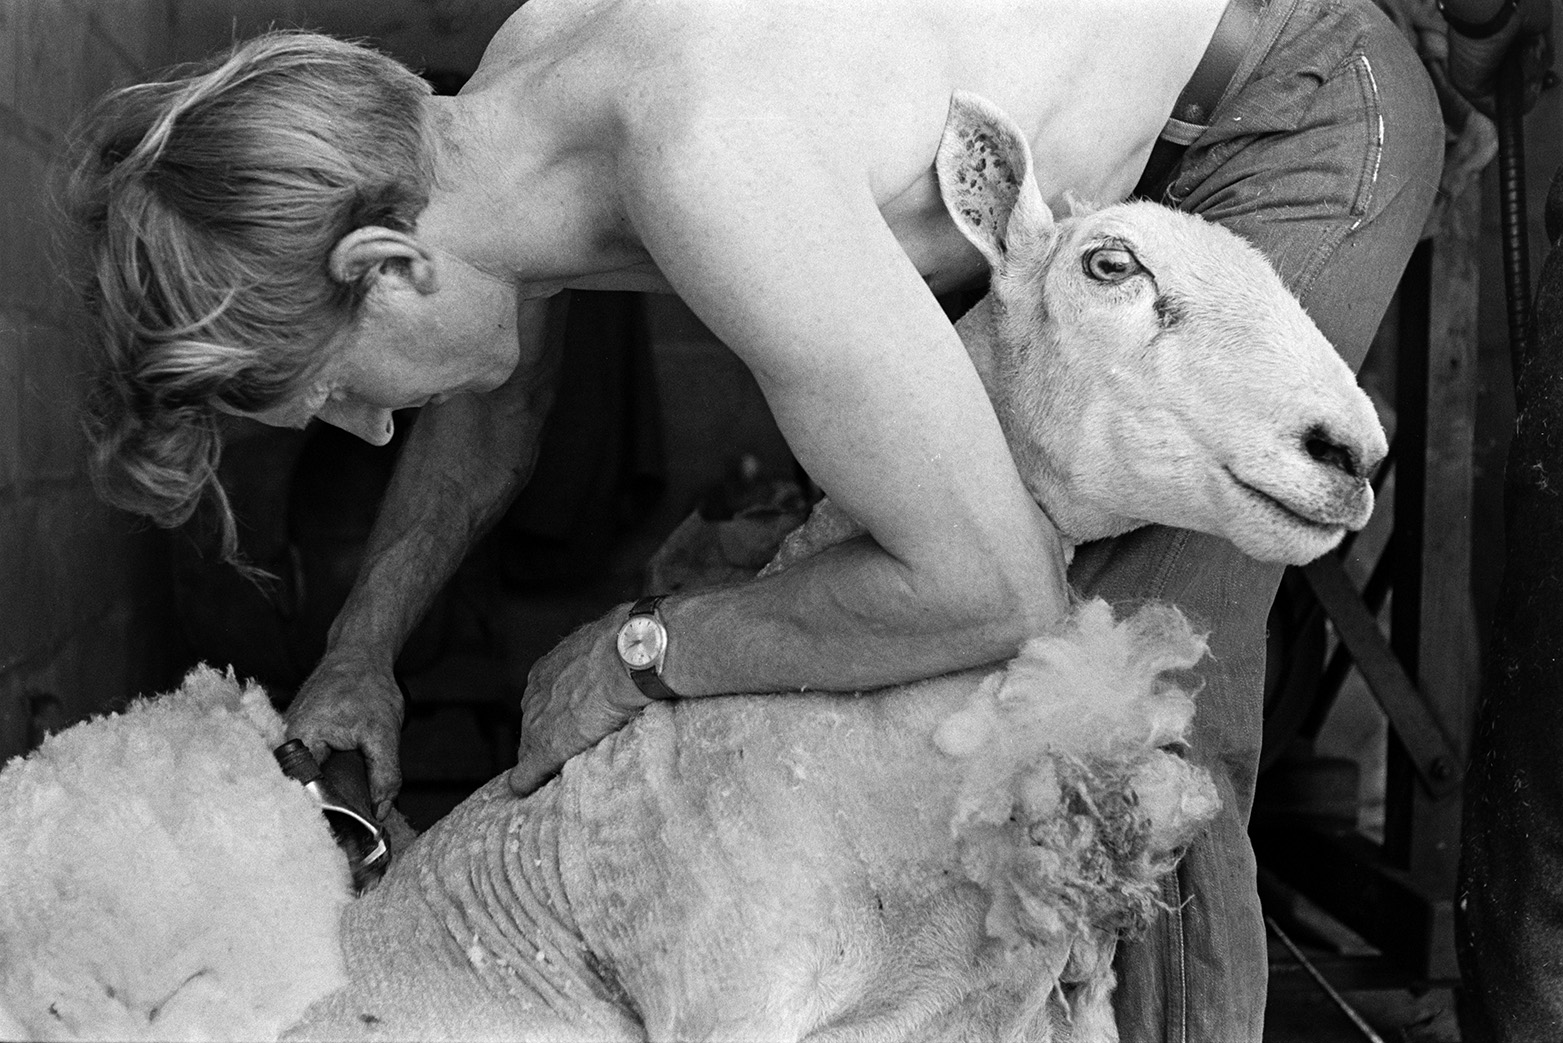 Ivor Bourne shearing a sheep in a barn at Mill Road Farm, Beaford, using a shearing machine. The farm was also known as Jeffrys.